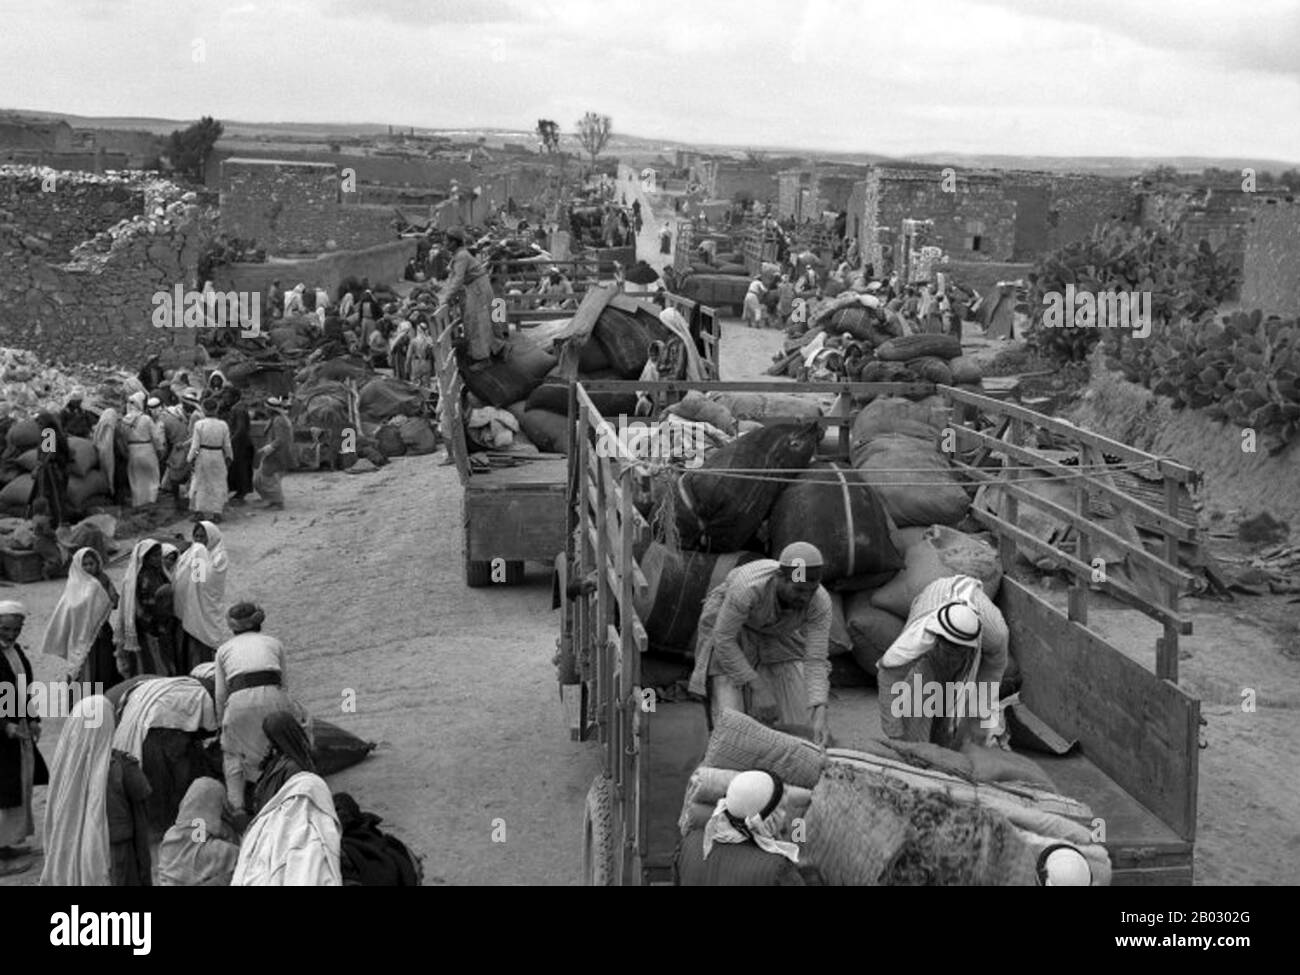 The 1948 Palestinian exodus, known in Arabic as the Nakba (Arabic: al-Nakbah, lit.'catastrophe'), occurred when more than 700,000 Palestinian Arabs fled or were expelled from their homes, during the 1947–1948 Civil War in Mandatory Palestine and the 1948 Arab–Israeli War.  The exact number of refugees is a matter of dispute, but around 80 percent of the Arab inhabitants of what became Israel (50 percent of the Arab total of Mandatory Palestine) left or were expelled from their homes.  Later in the war, Palestinians were forcibly expelled as part of 'Plan Dalet' in a policy of 'ethnic cleansing Stock Photo